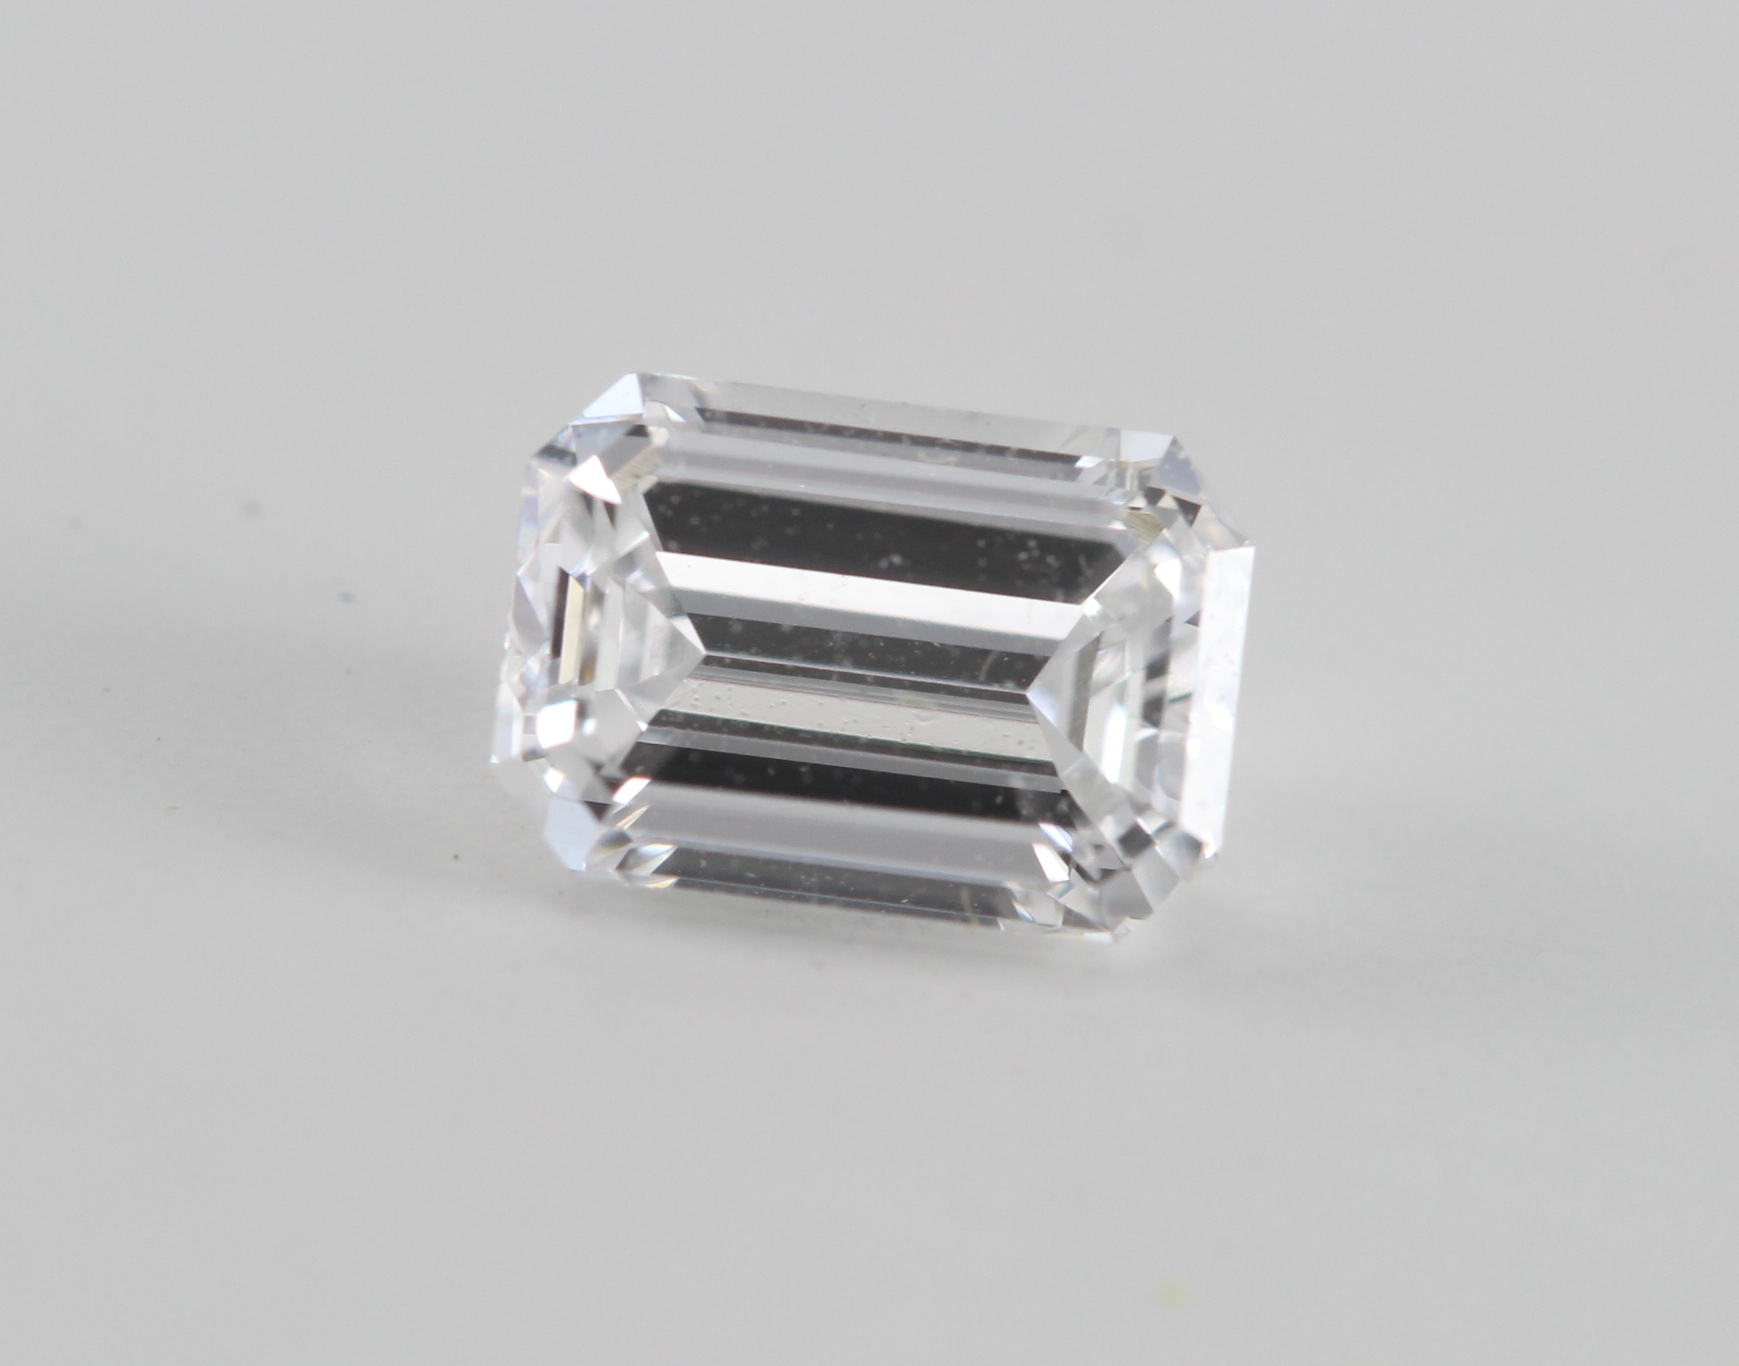 An emerald-cut loose diamond (0.57 Ct Ct, D Color, VVS2 Clarity, WGI Certified) for sale online at CaratsDirect2u.com.